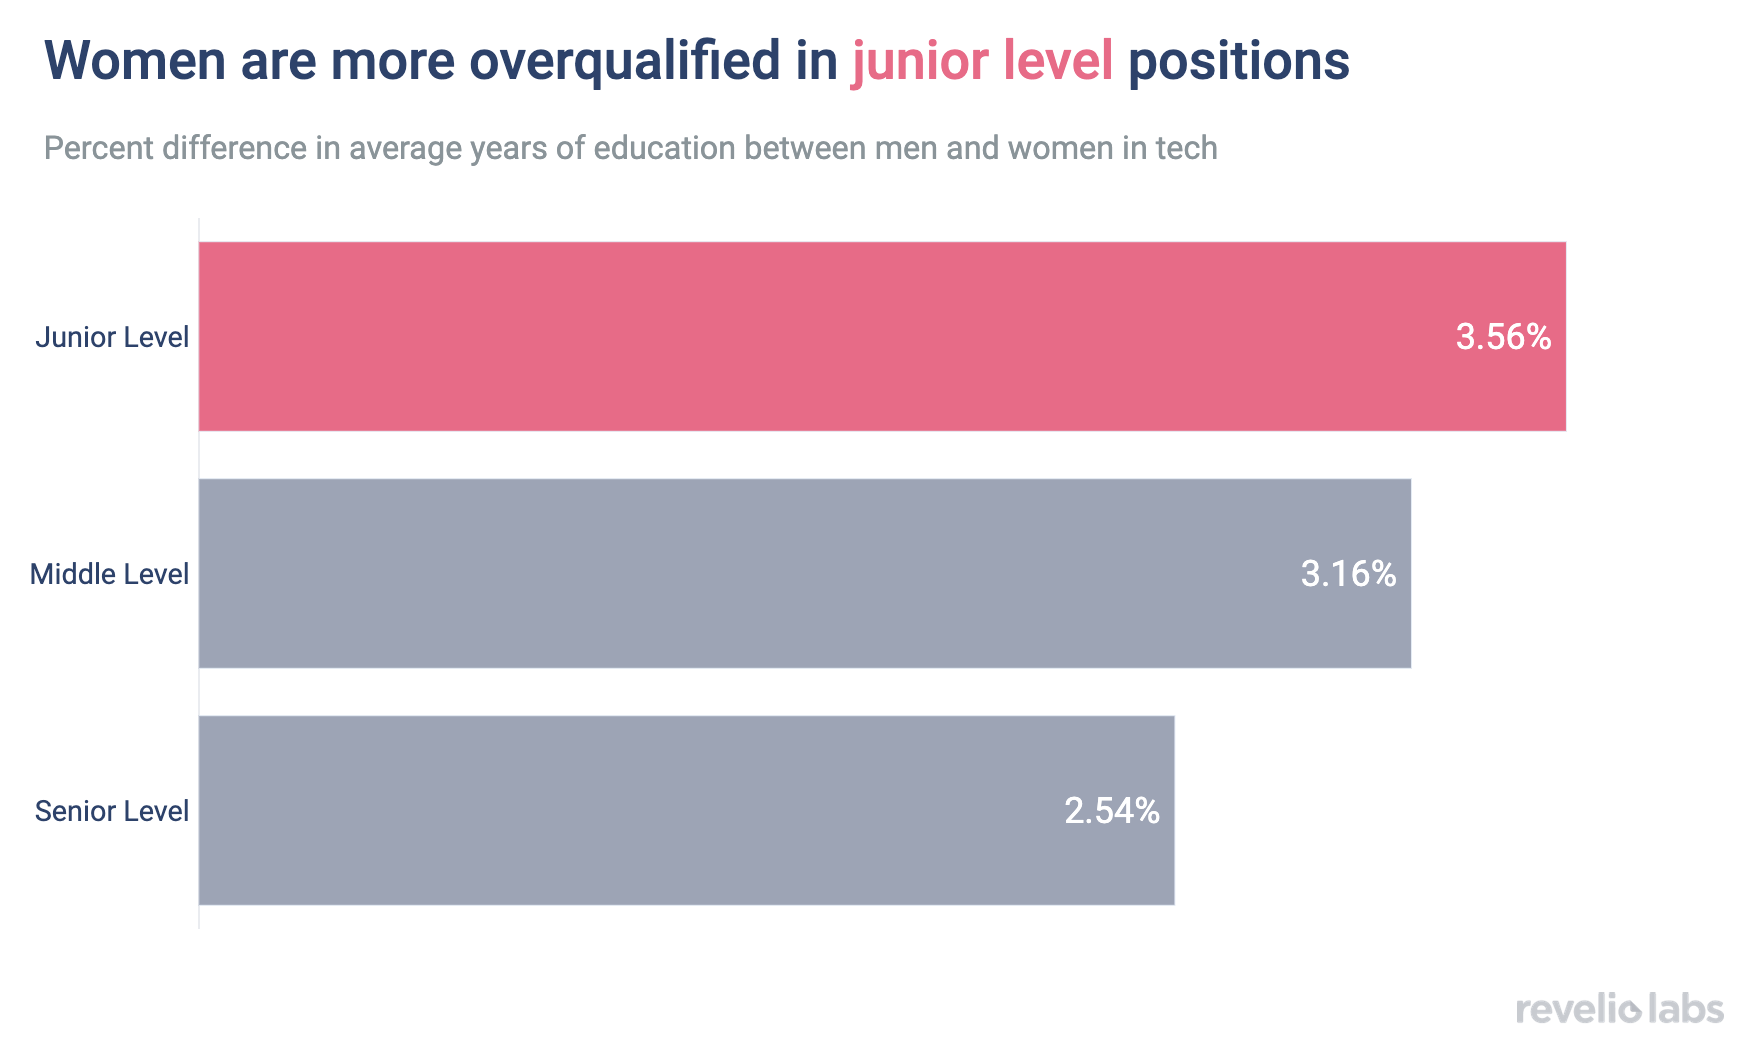 women are more overqualified in junior level positions